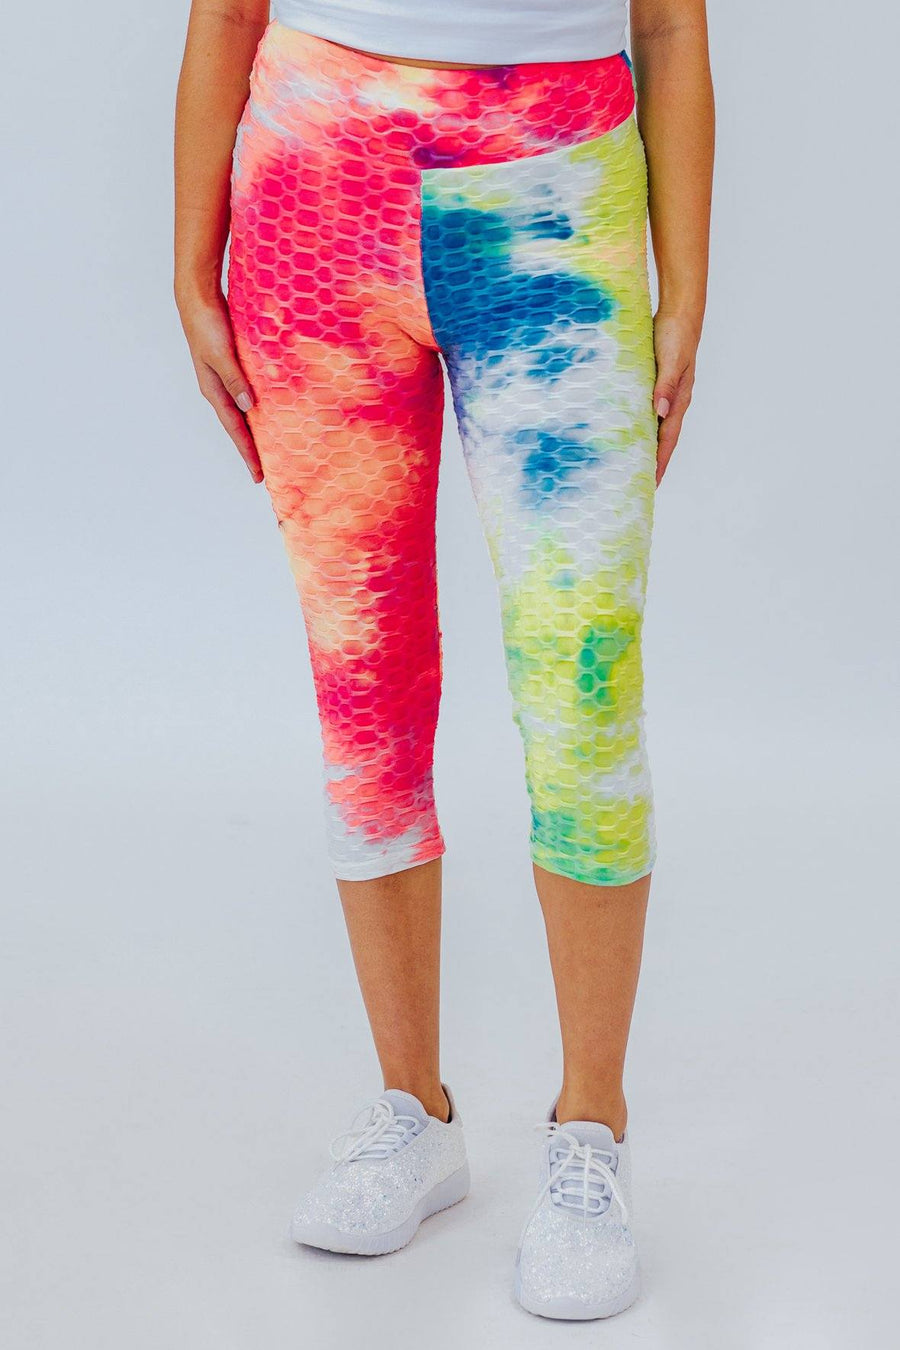 Buy comfortable leggings in attractive colors & designs - Filly Flair